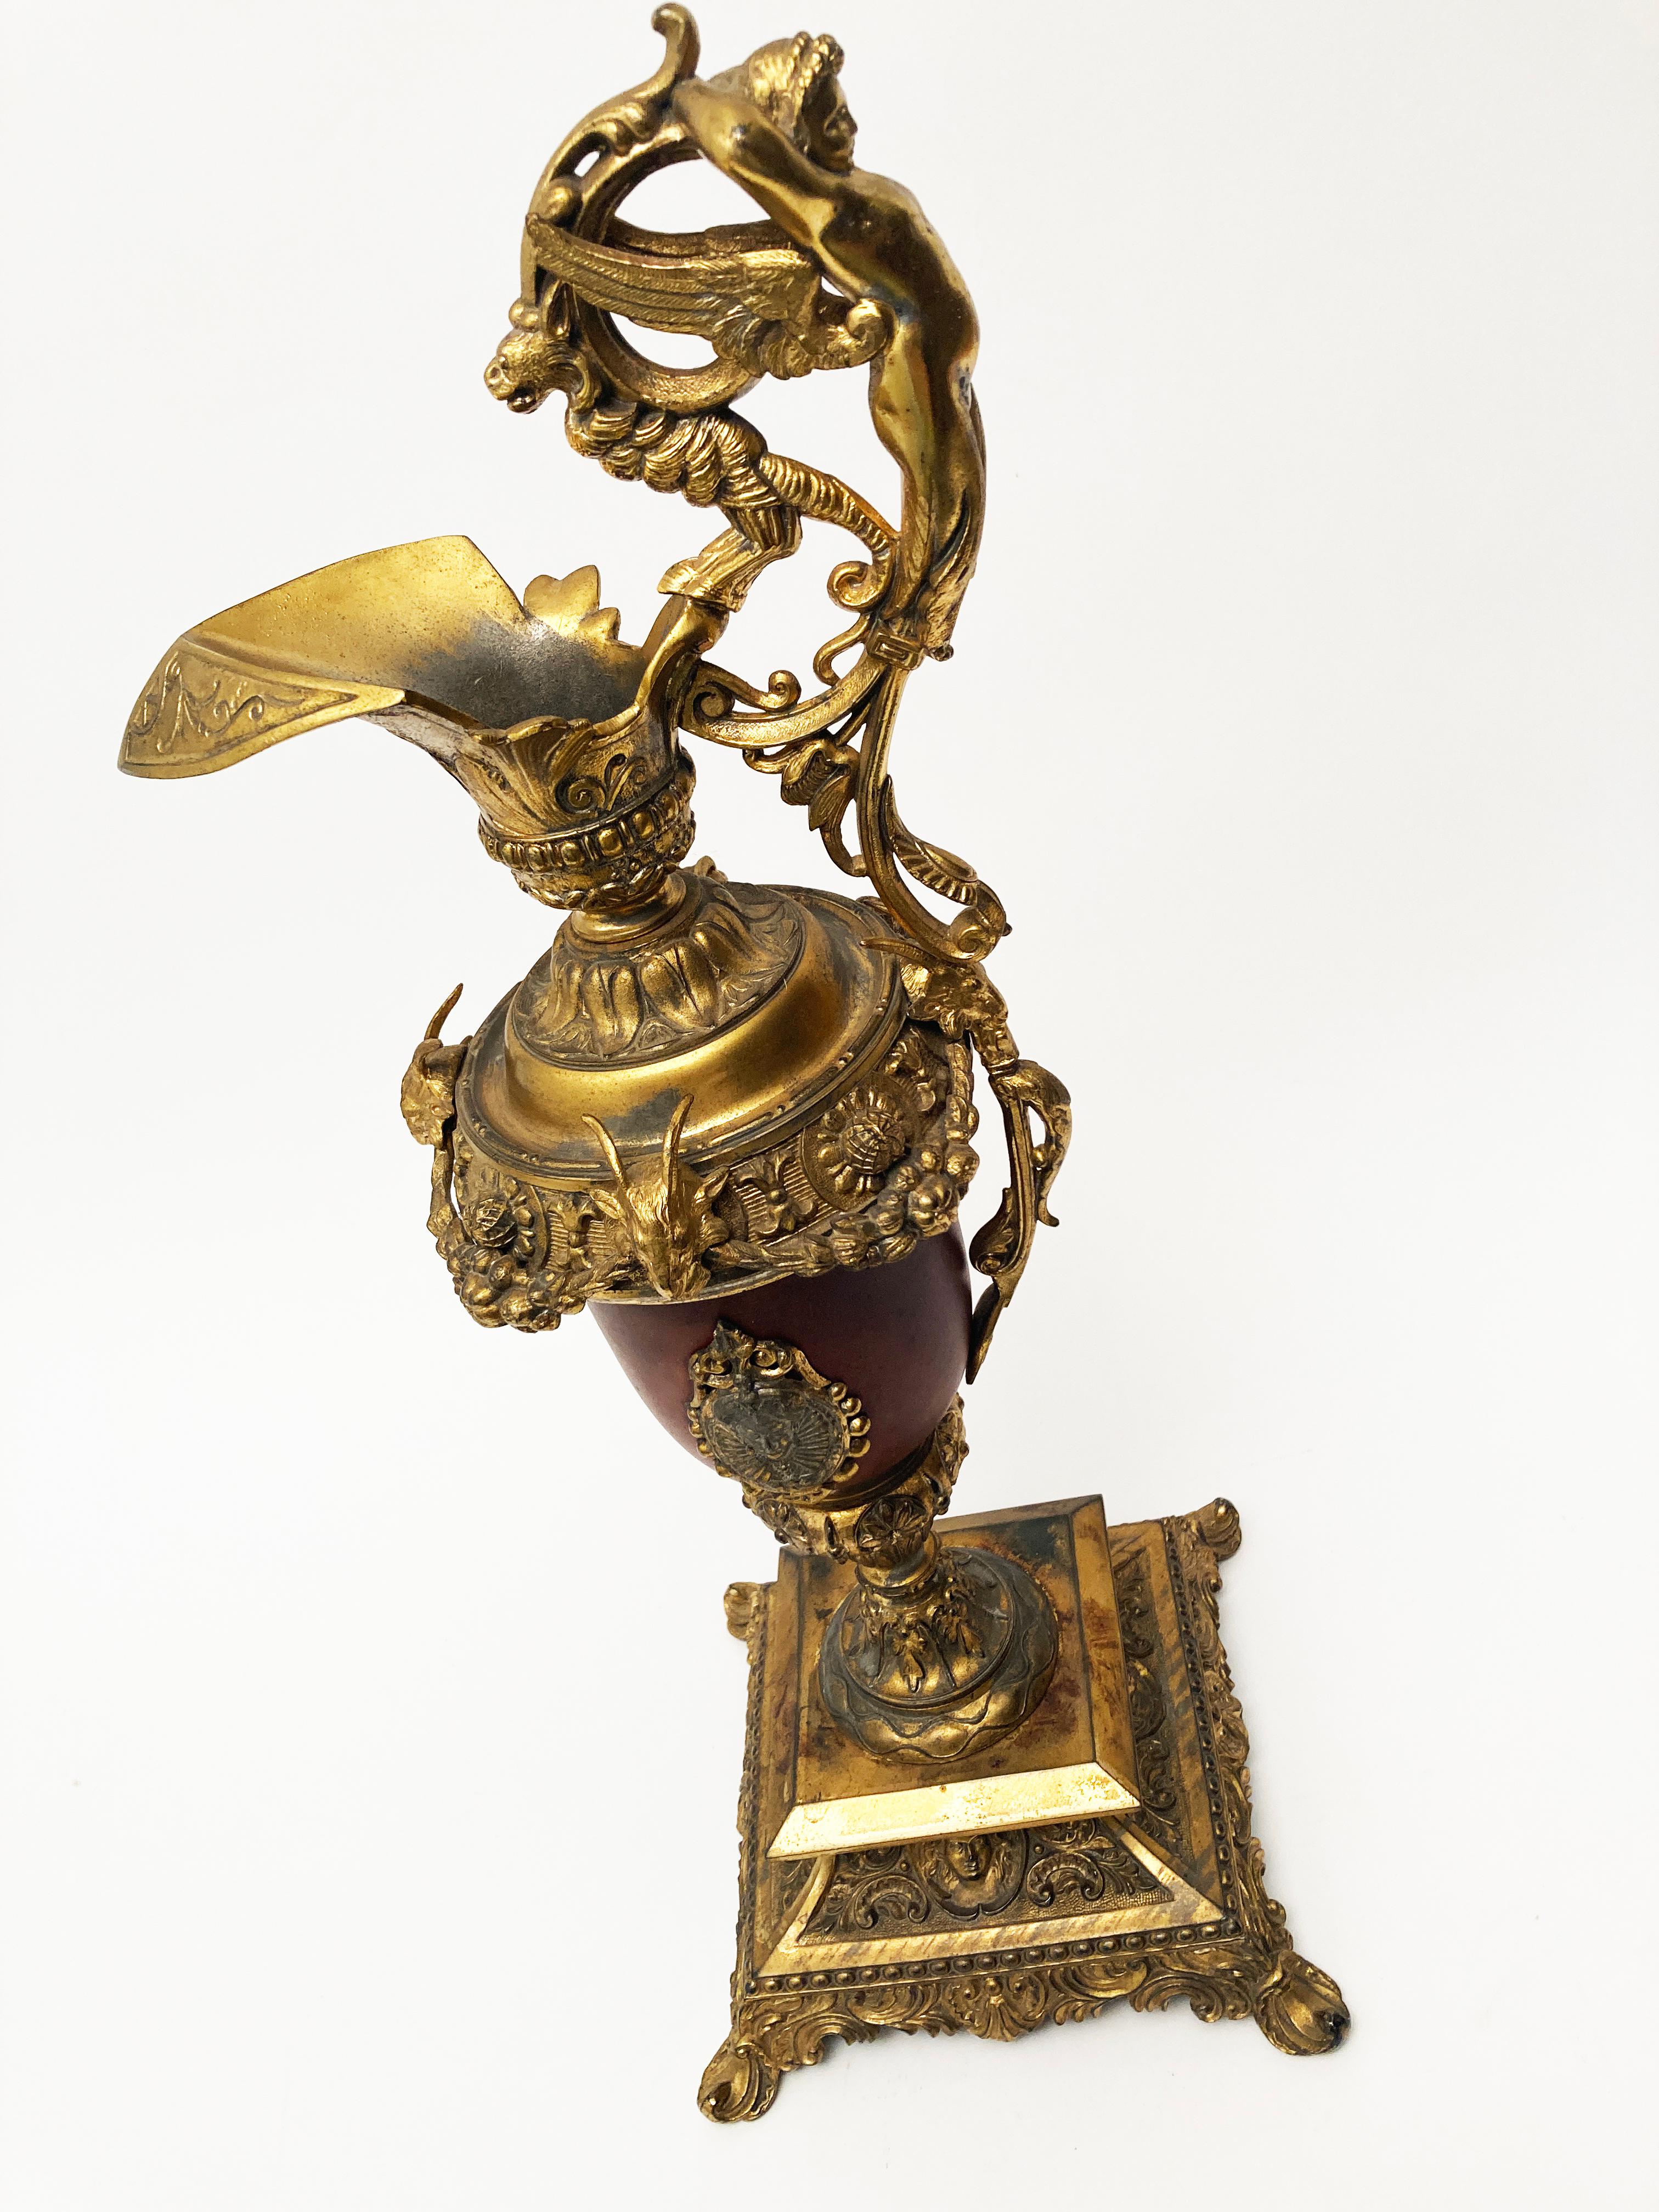 This ewer is a stunning decorator item! The attention to detail from this era is nothing short of exquisite. From the beautiful cherub that adorns the handle to the rams heads, every tiny detail is a work of art. This piece would be a wonderful